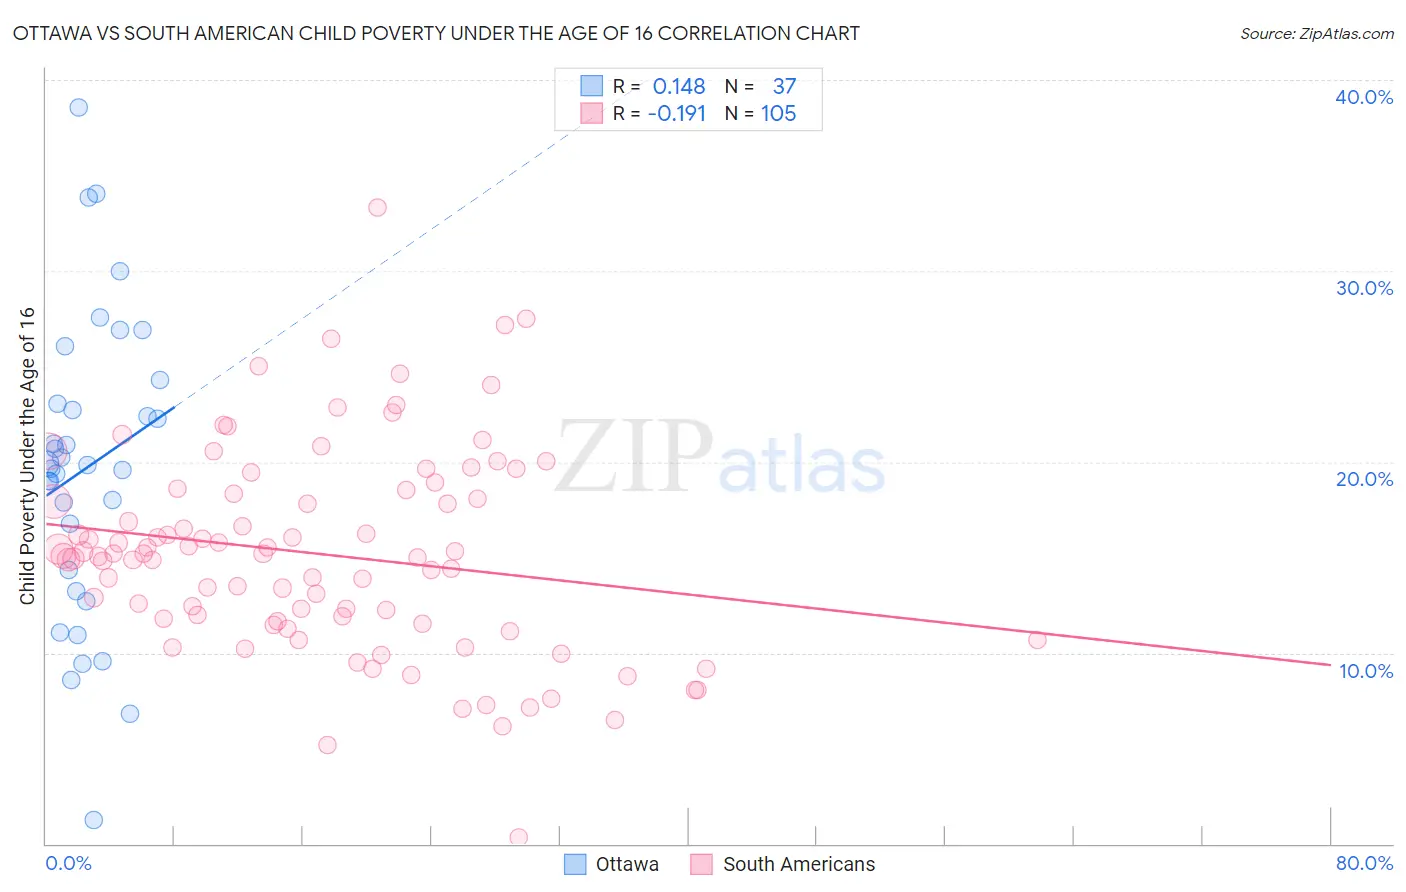 Ottawa vs South American Child Poverty Under the Age of 16